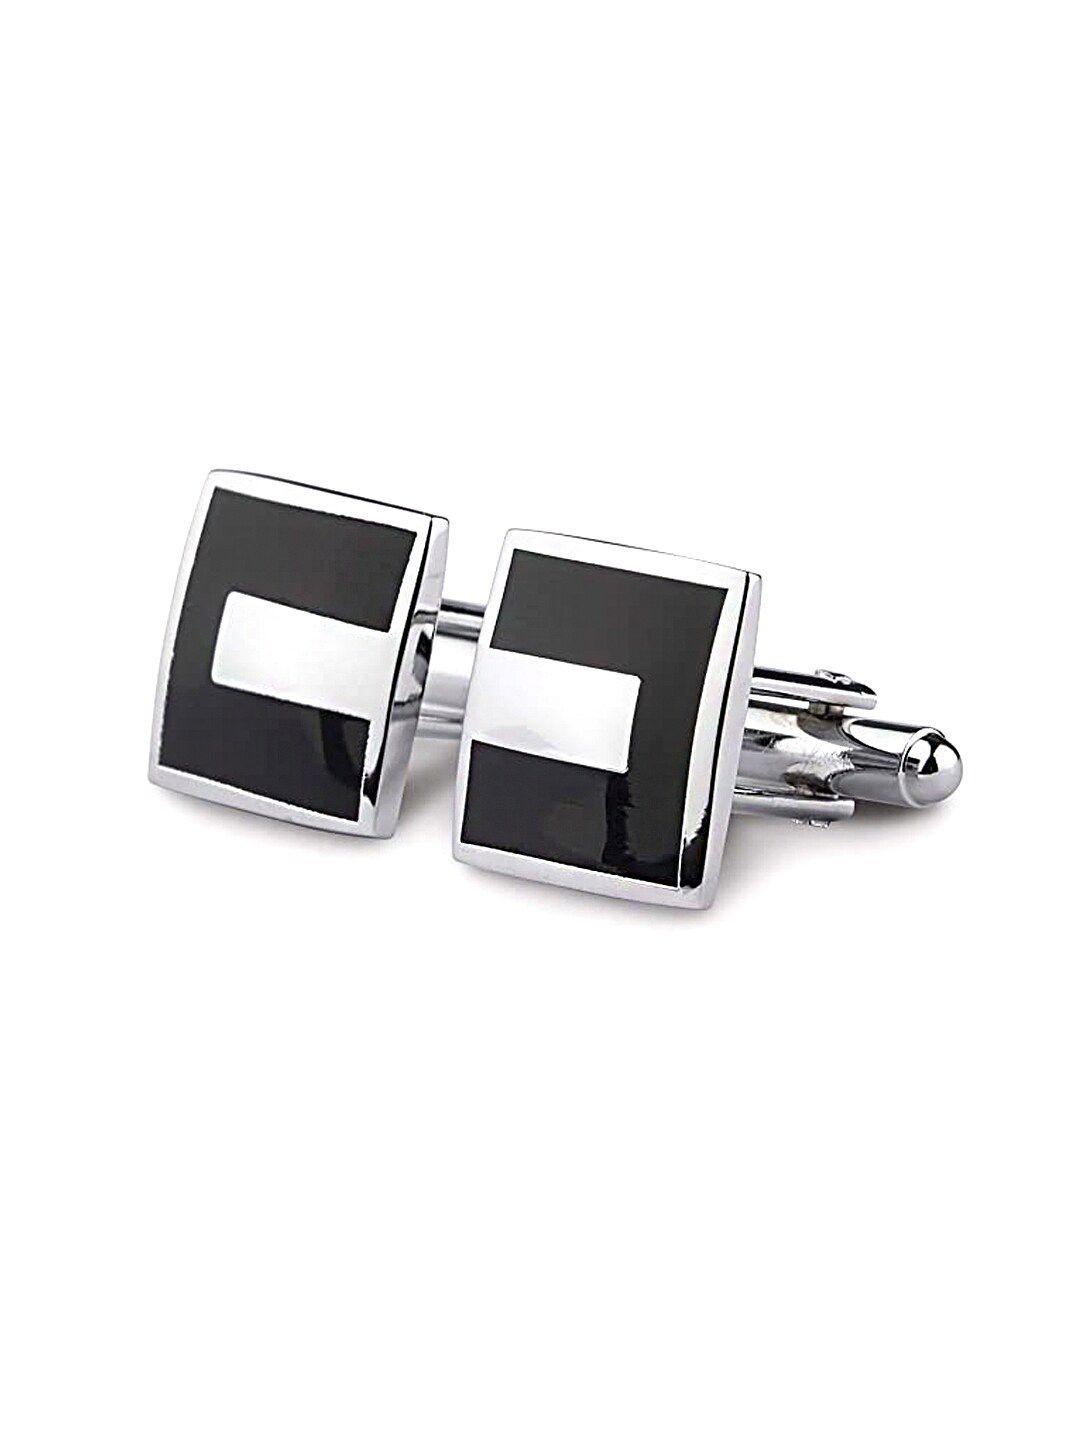 yellow chimes silver-toned & black cufflink